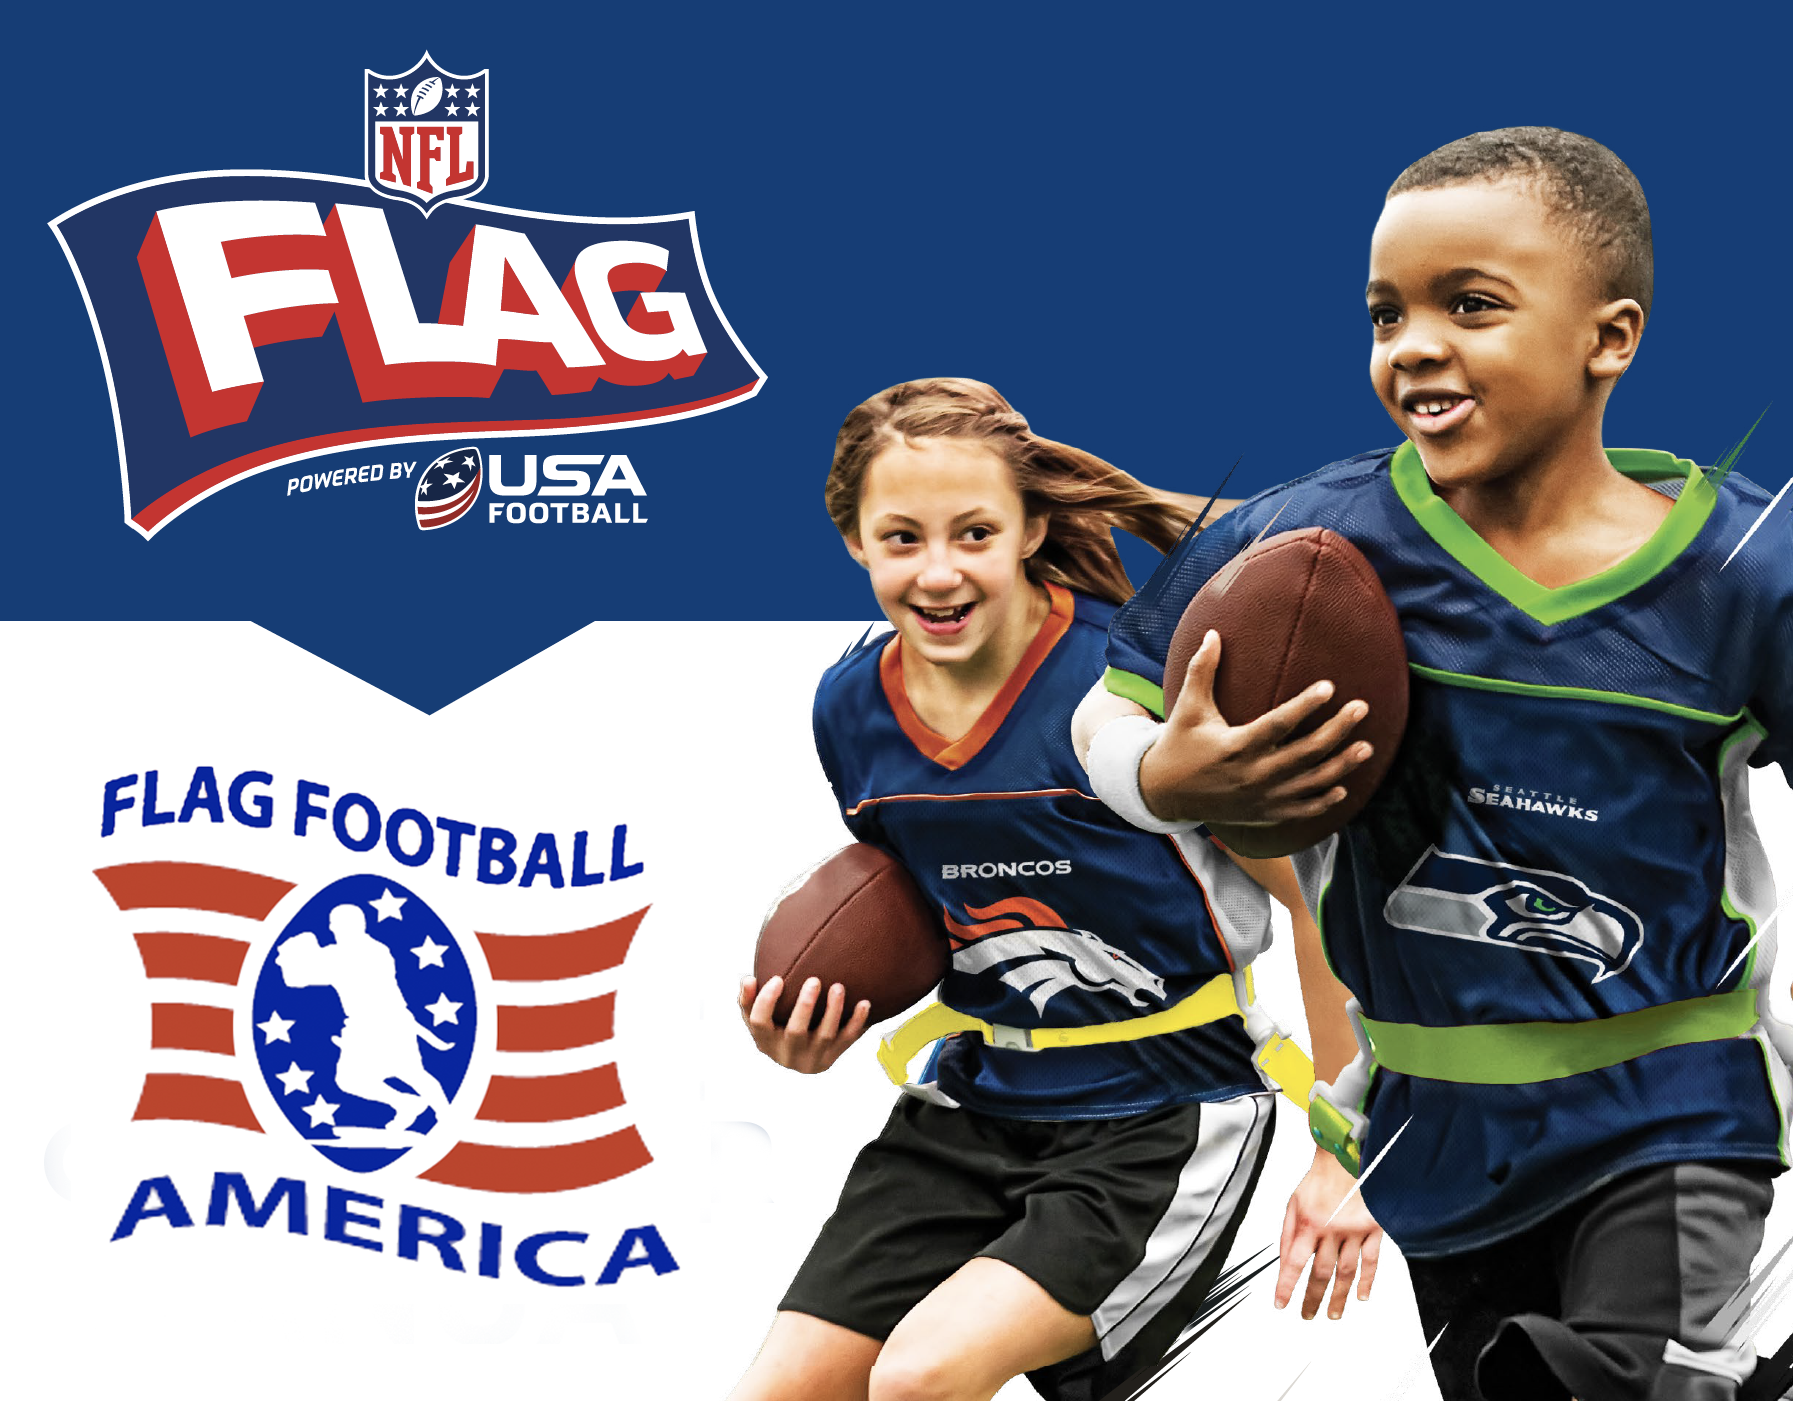 youth-co-ed-nfl-flag-football-league-upper-merion-township